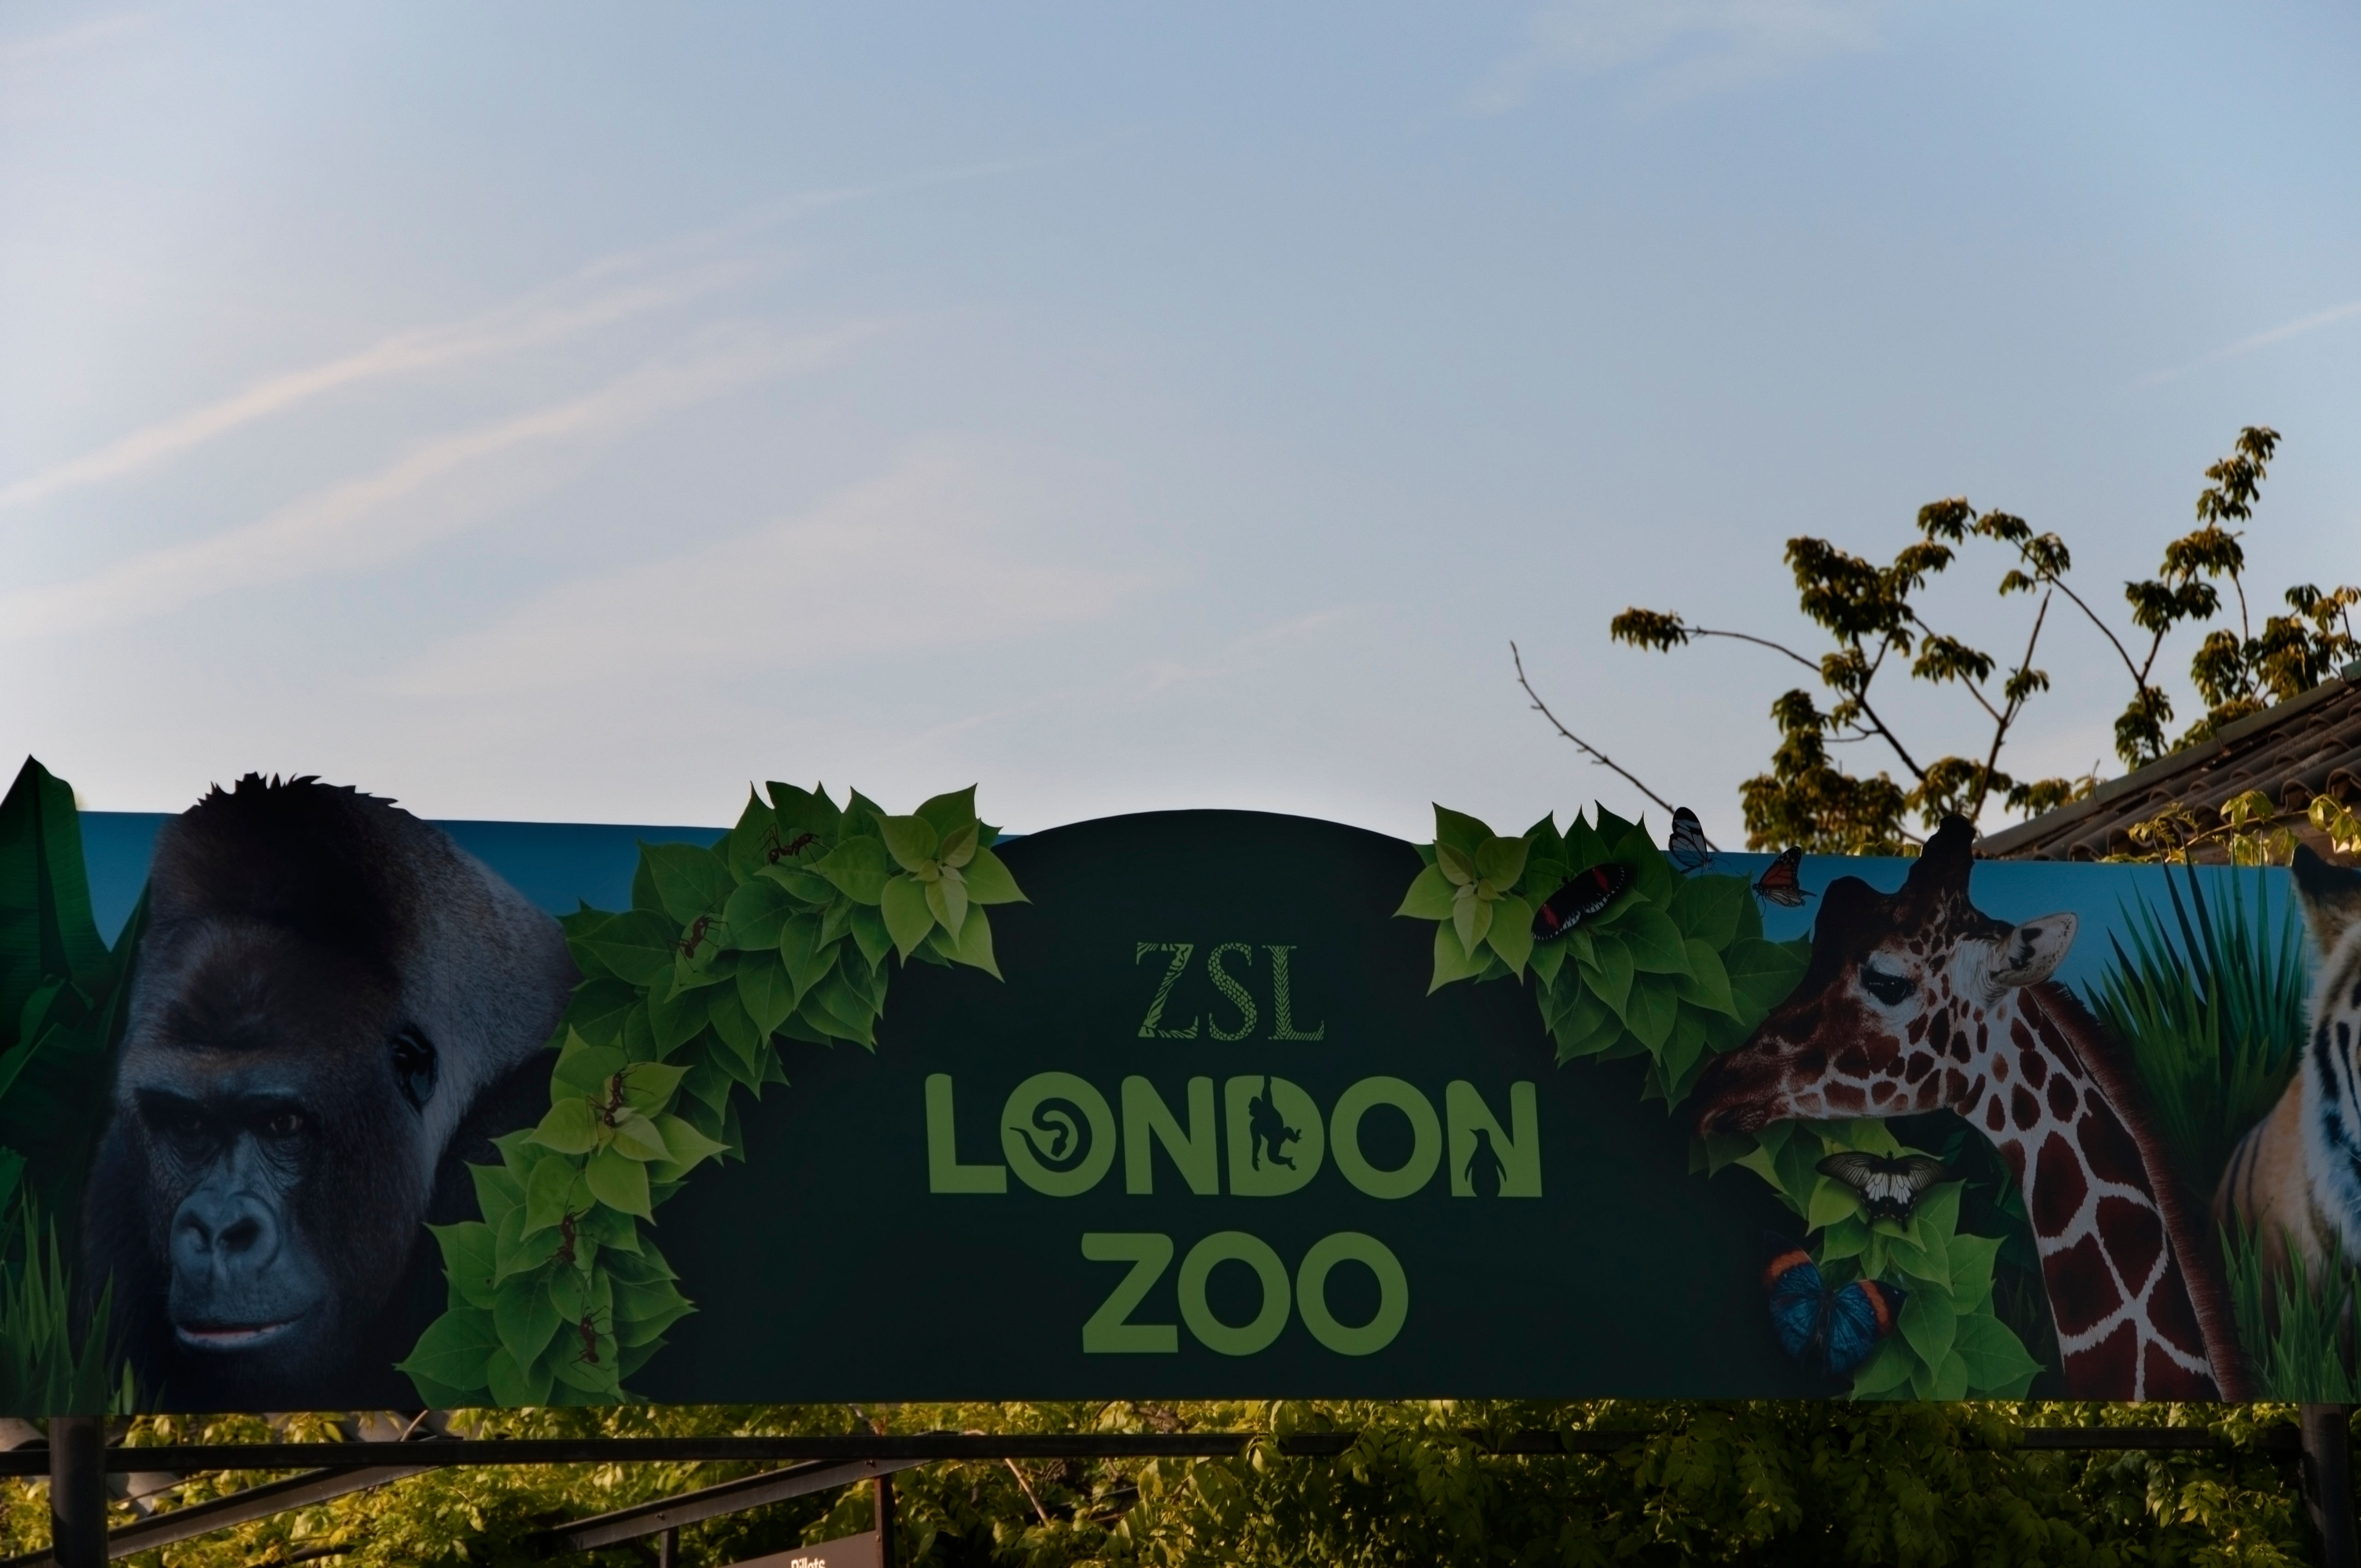 London Zoo is only closed on Christmas Day